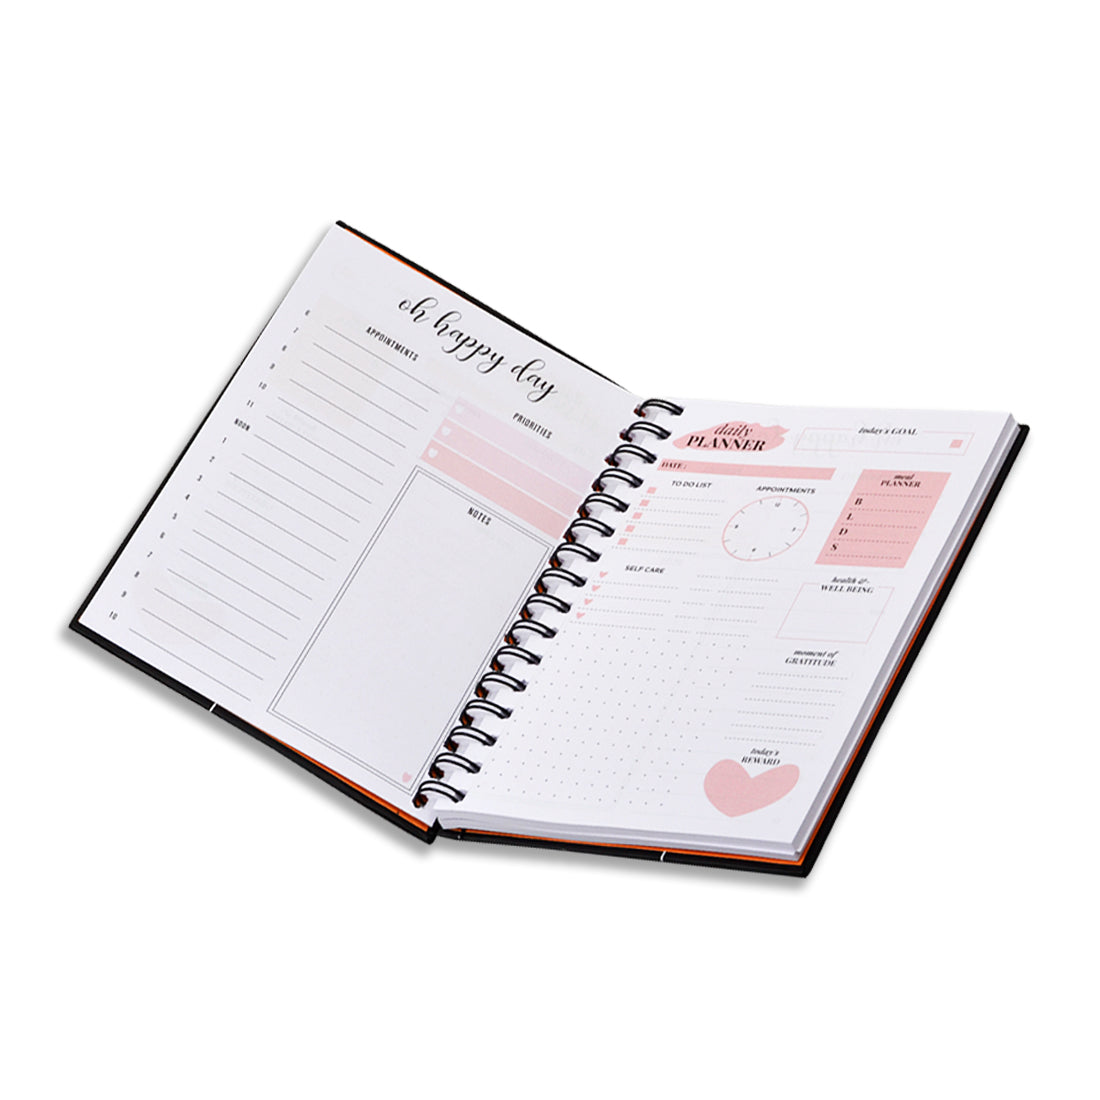 Undated To Do List Diary Weekly Monthly Budget Goal Planner for Work Office Stationery Home | Twin Wire Spiral Binding